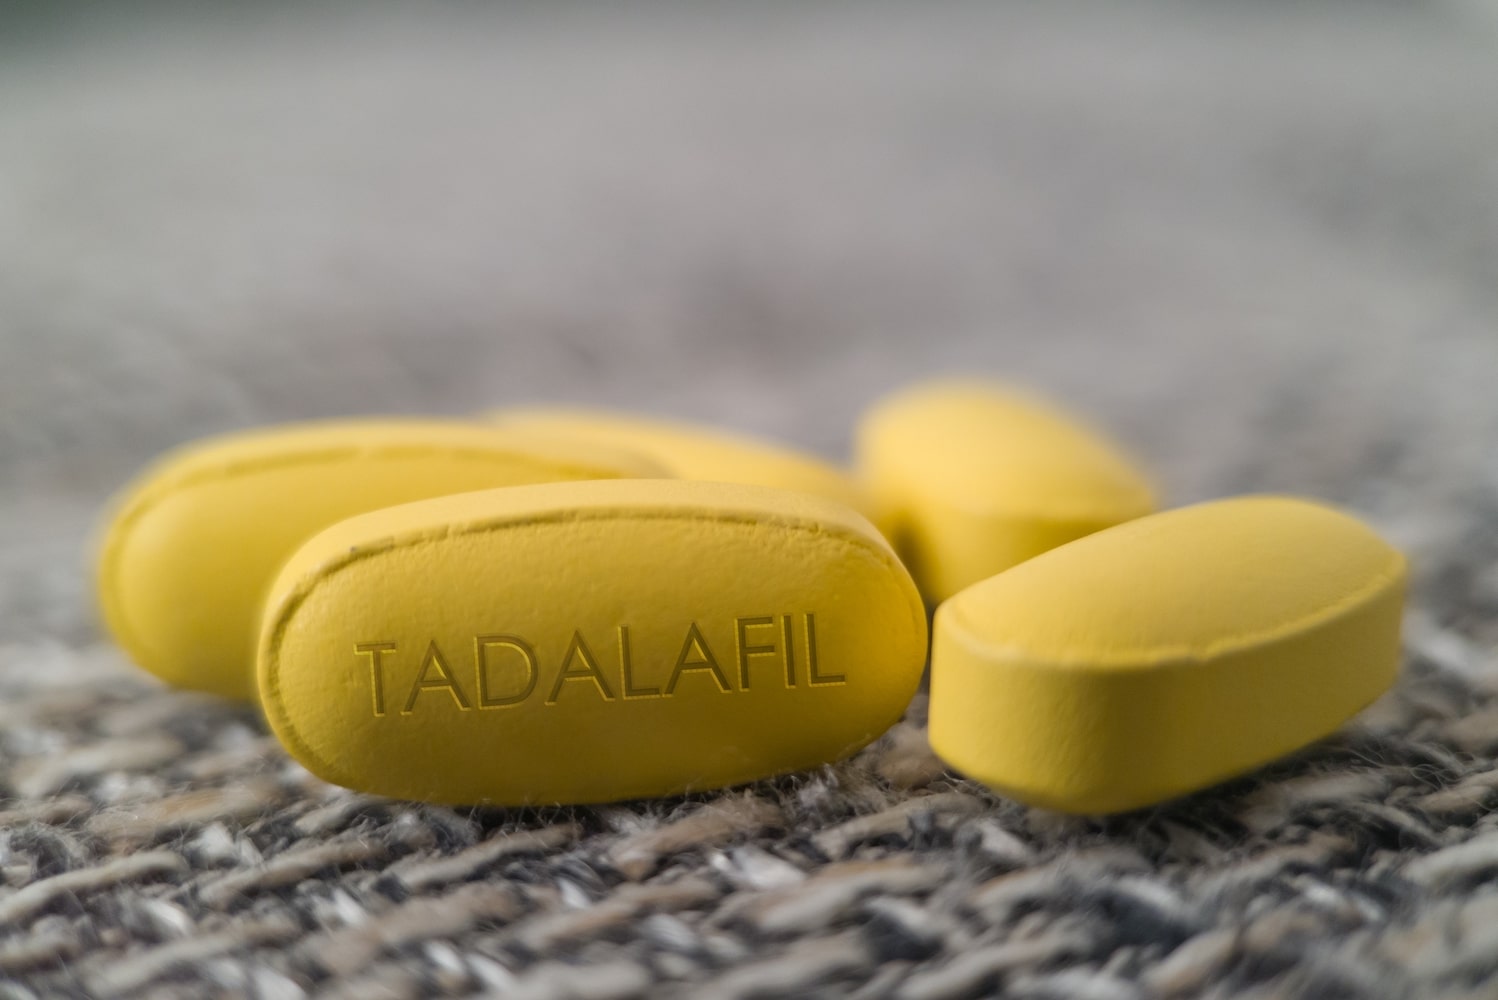 Cialis: Addressing Concerns About Dependency and Addiction